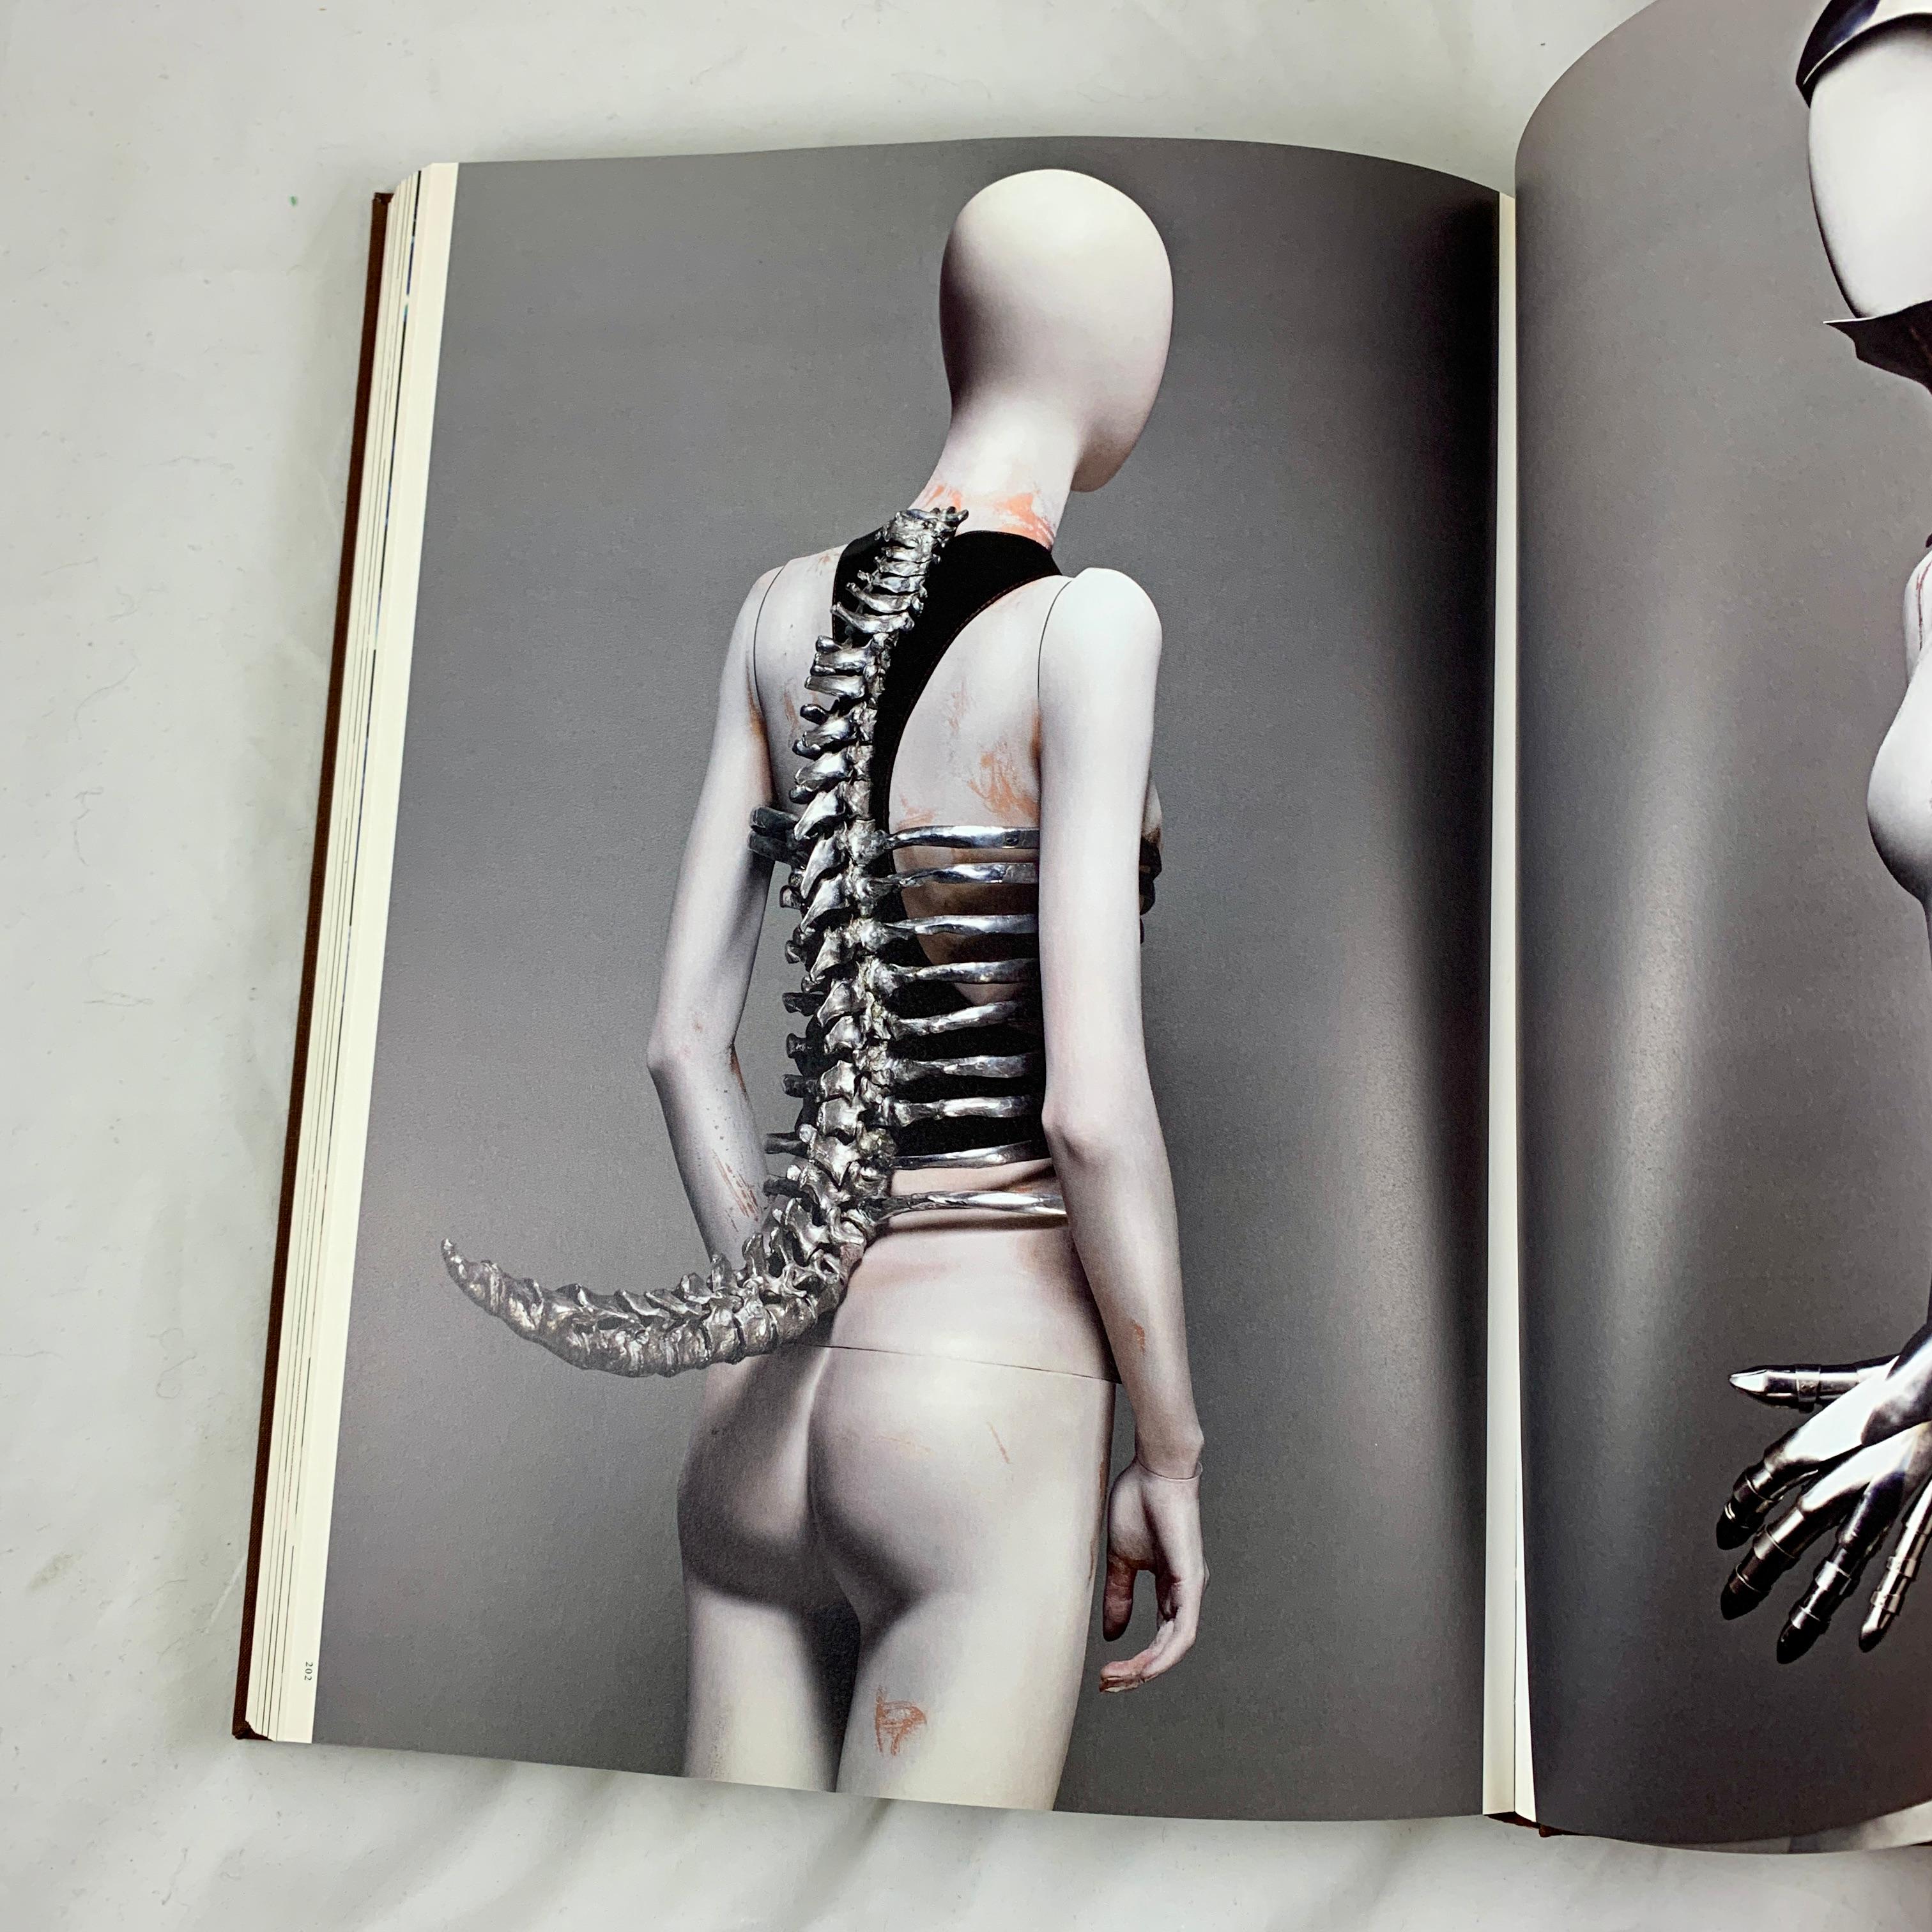 Alexander McQueen: Savage Beauty, Andrew Bolton MOMA Illustrated Hardcover Book 2